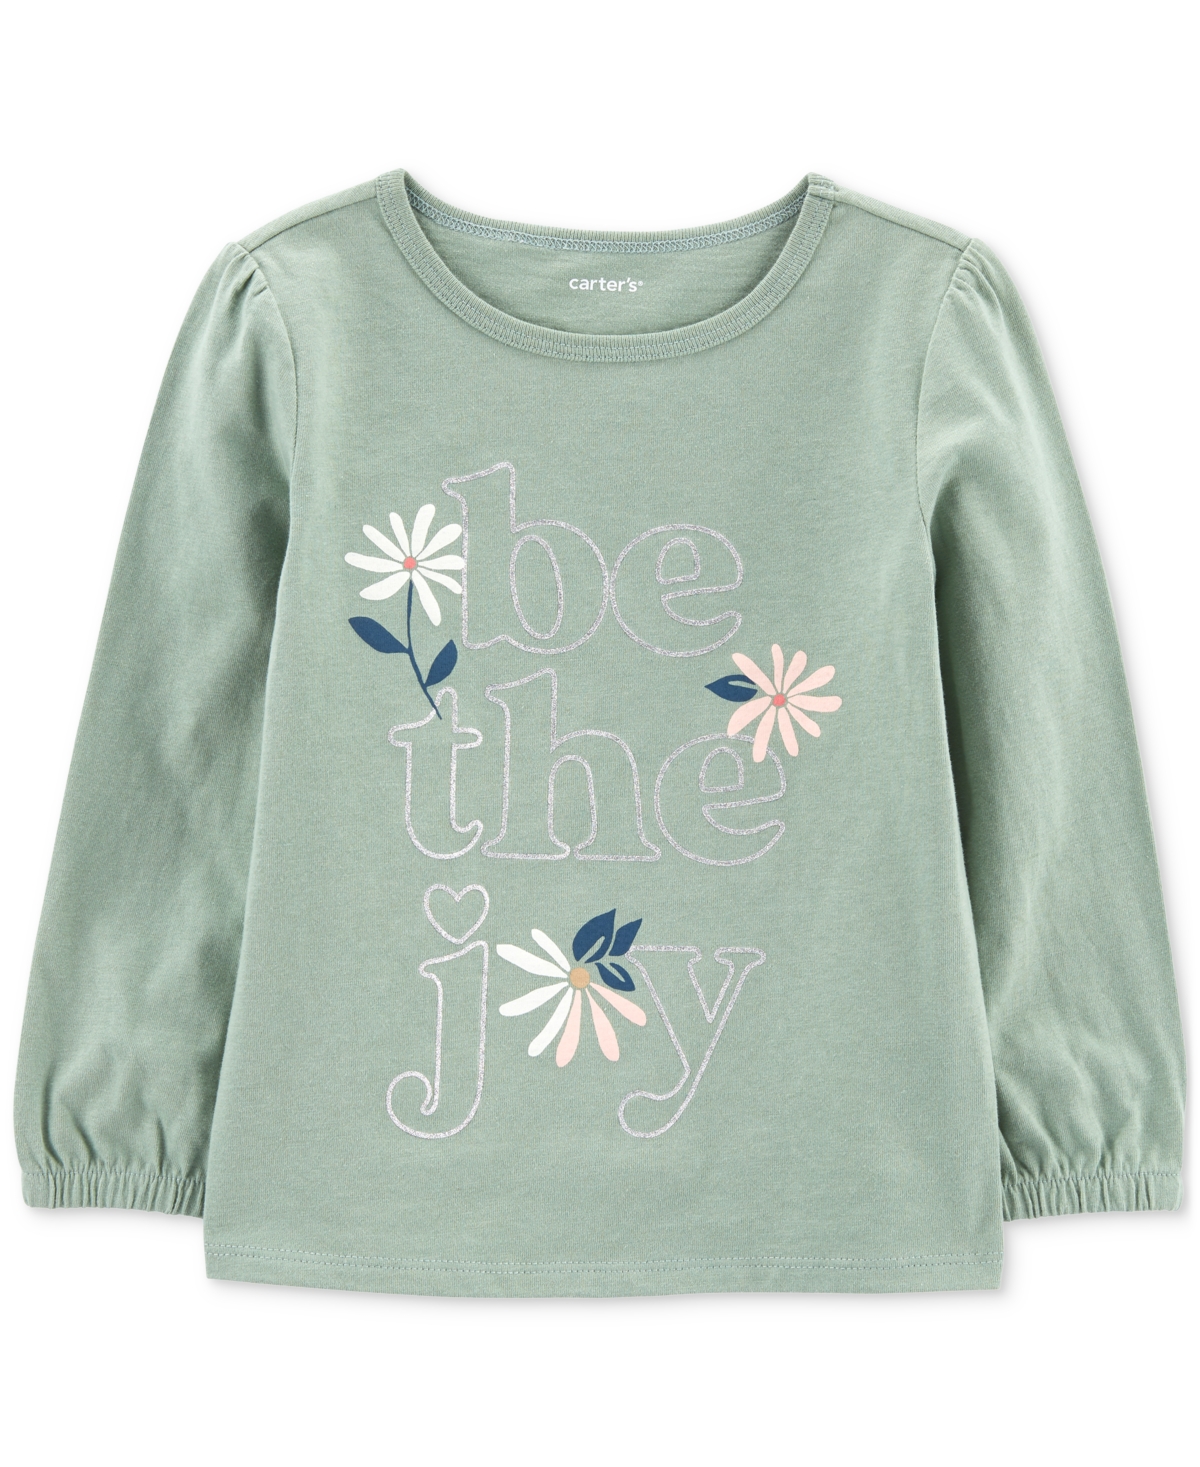 Carter's Babies' Toddler Girls Be The Joy Cotton Graphic T-shirt In Green